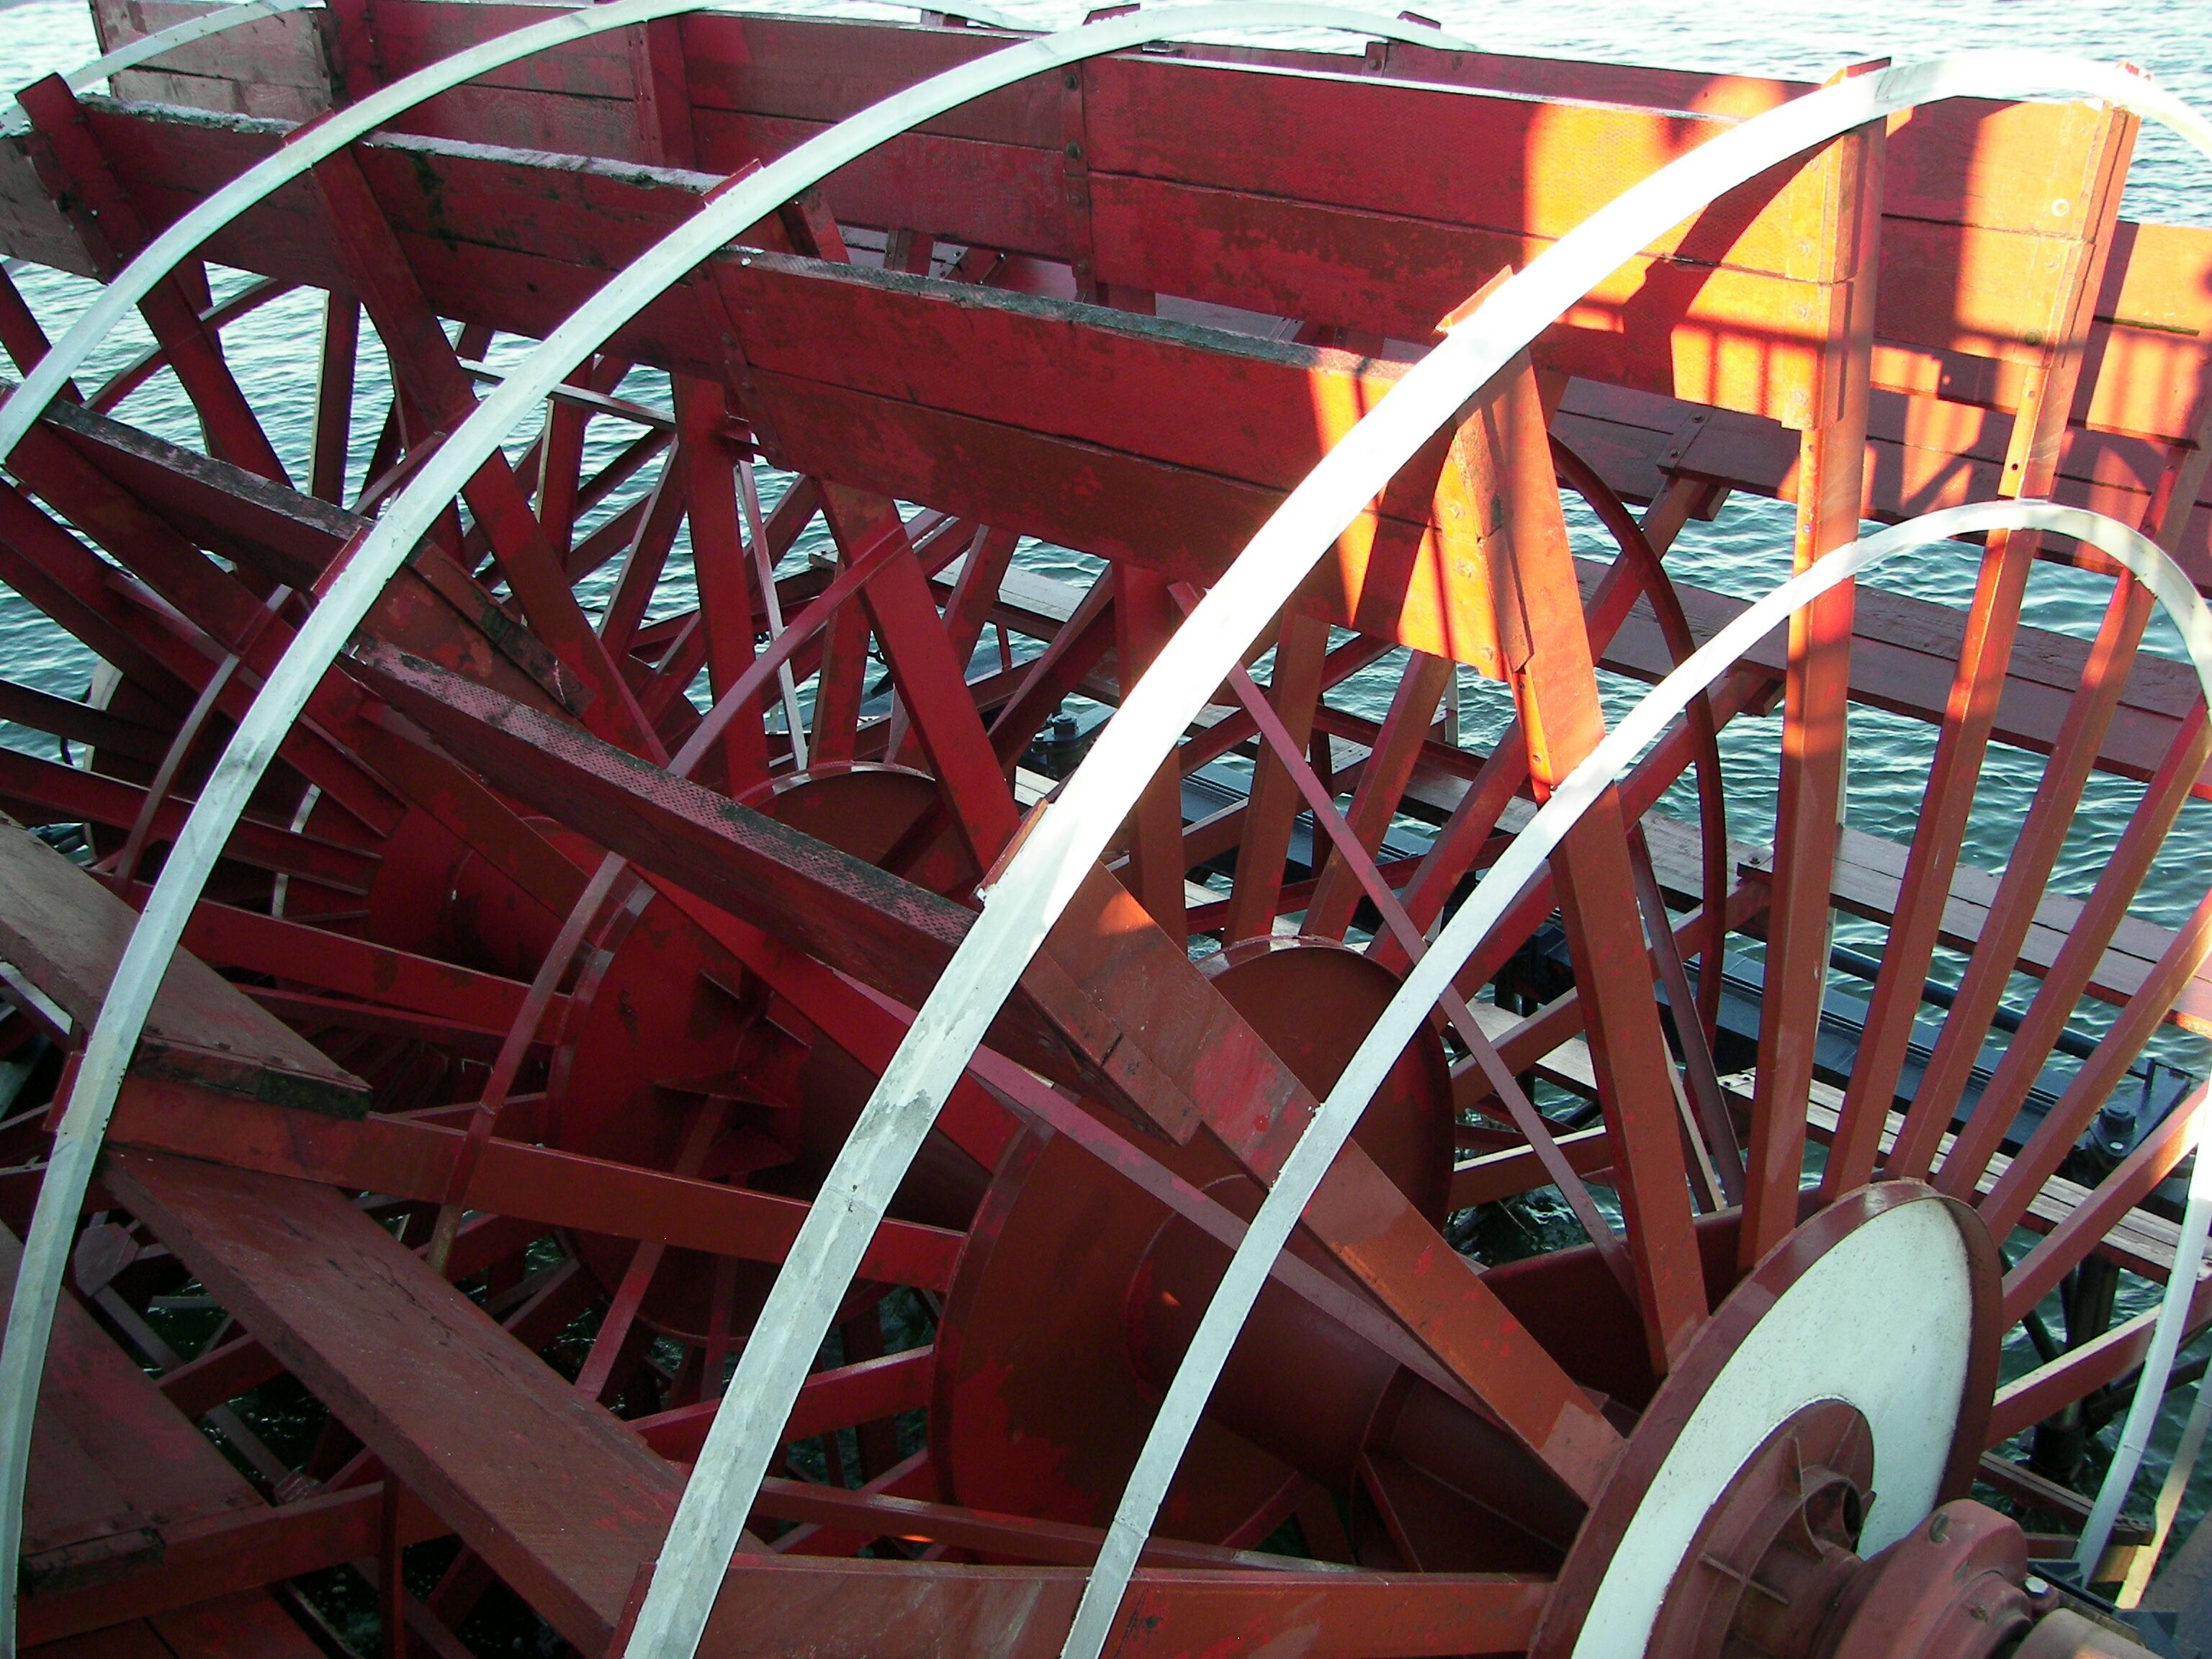 Queen of the West paddle wheel